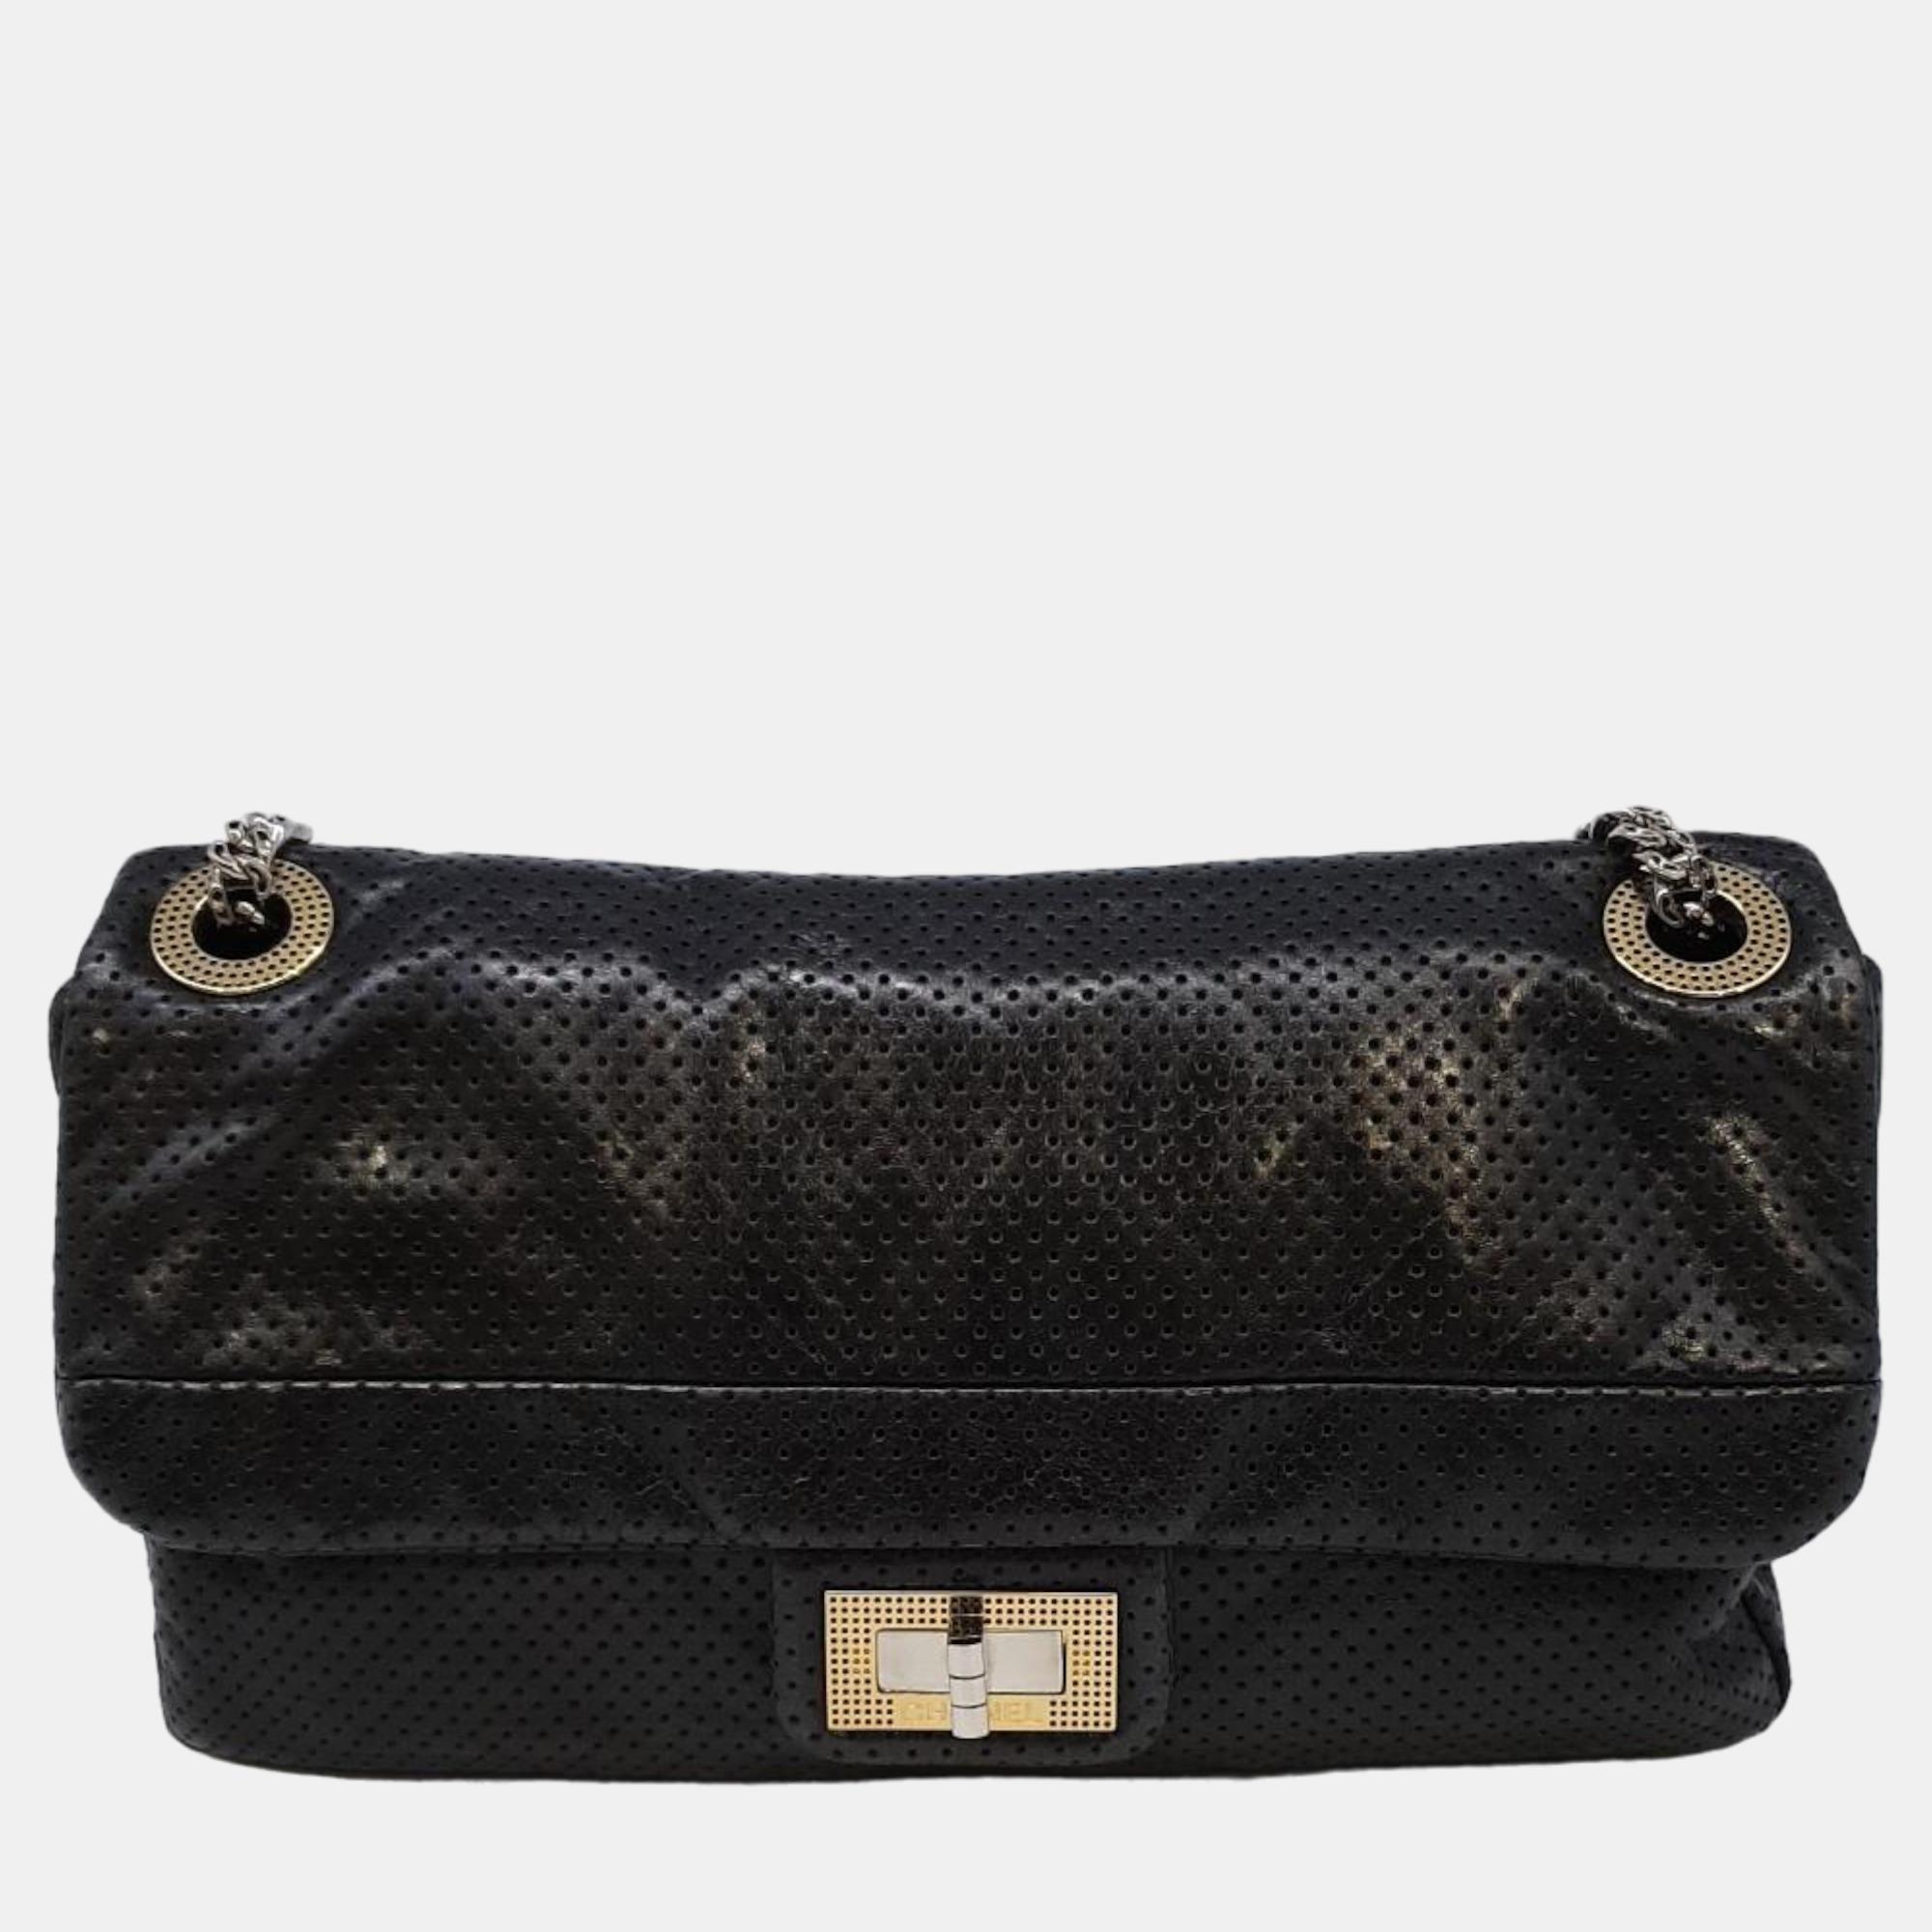 

Chanel Black Perforated Leather Chain Shoulder Bag